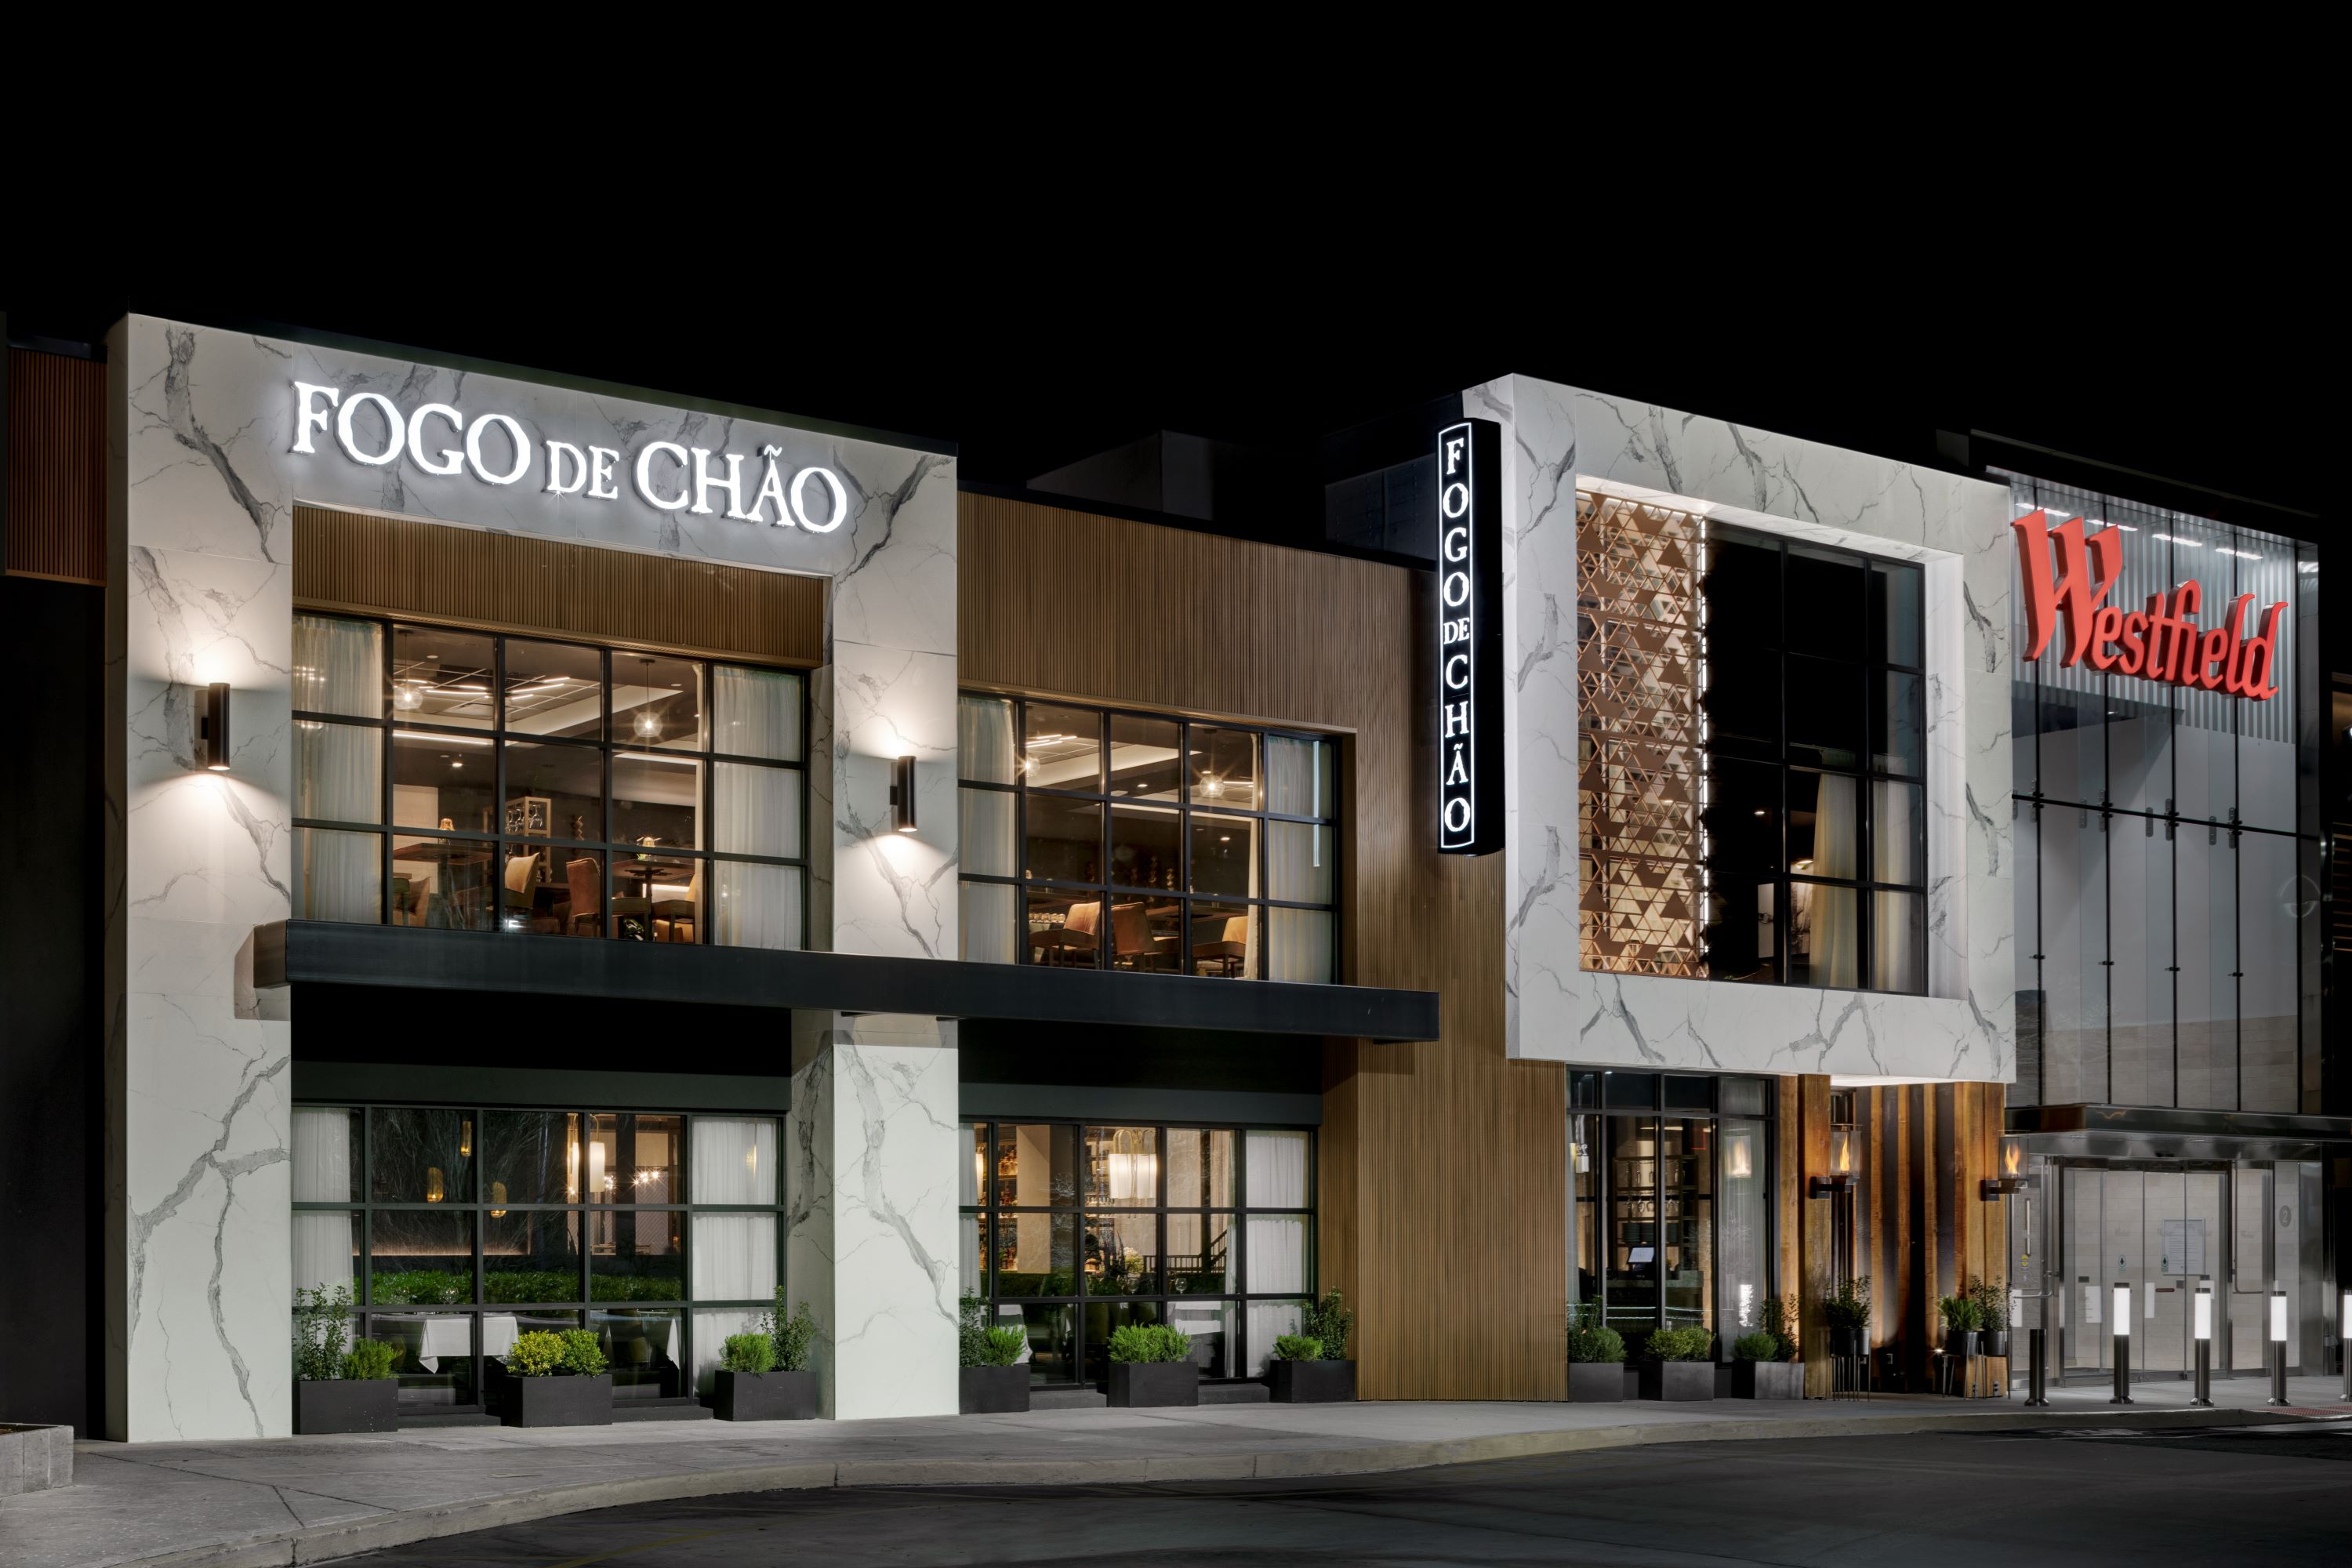  Renowned International Restaurant Brand Fogo de Chão to be Acquired by Bain Capital Private Equity from Rhône Capital 